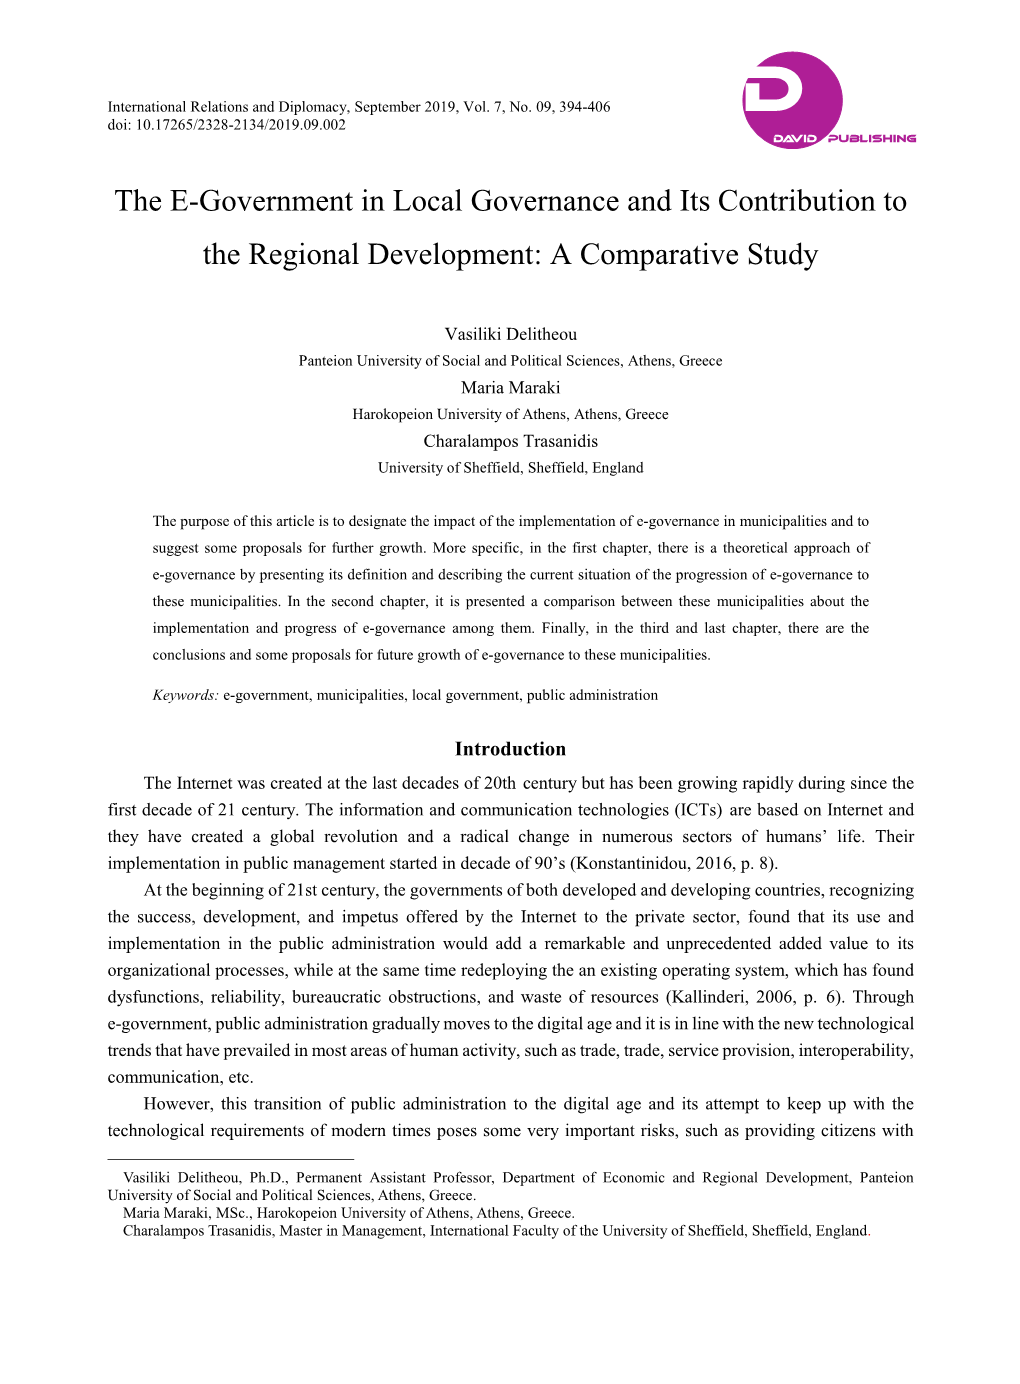 The E-Government in Local Governance and Its Contribution to the Regional Development: a Comparative Study